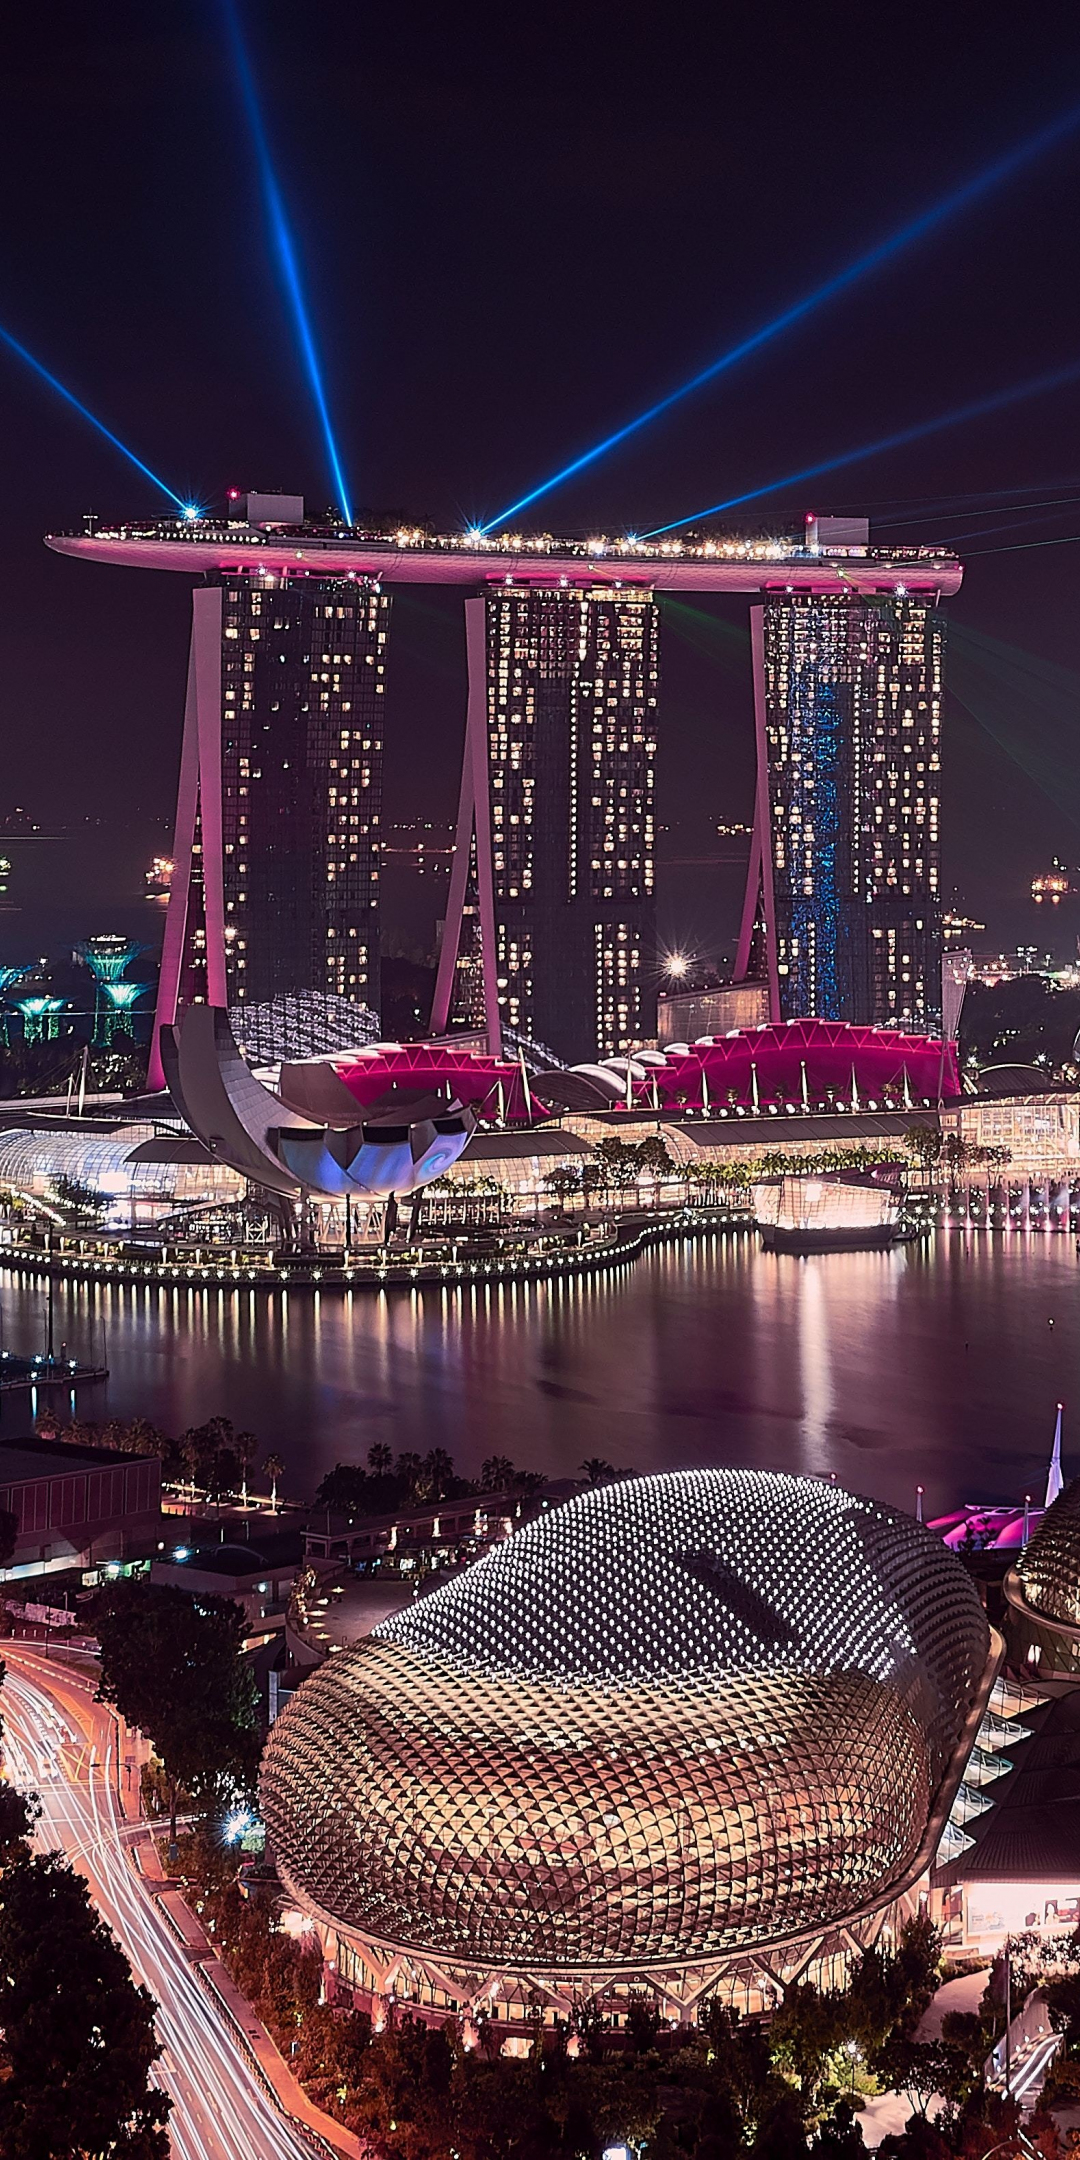 Download wallpaper 1080x2160 marina bay sands, singapore, cityscape,  buildings, aerial view, honor 7x, honor 9 lite, honor view 10, 1080x2160 hd  background, 17414